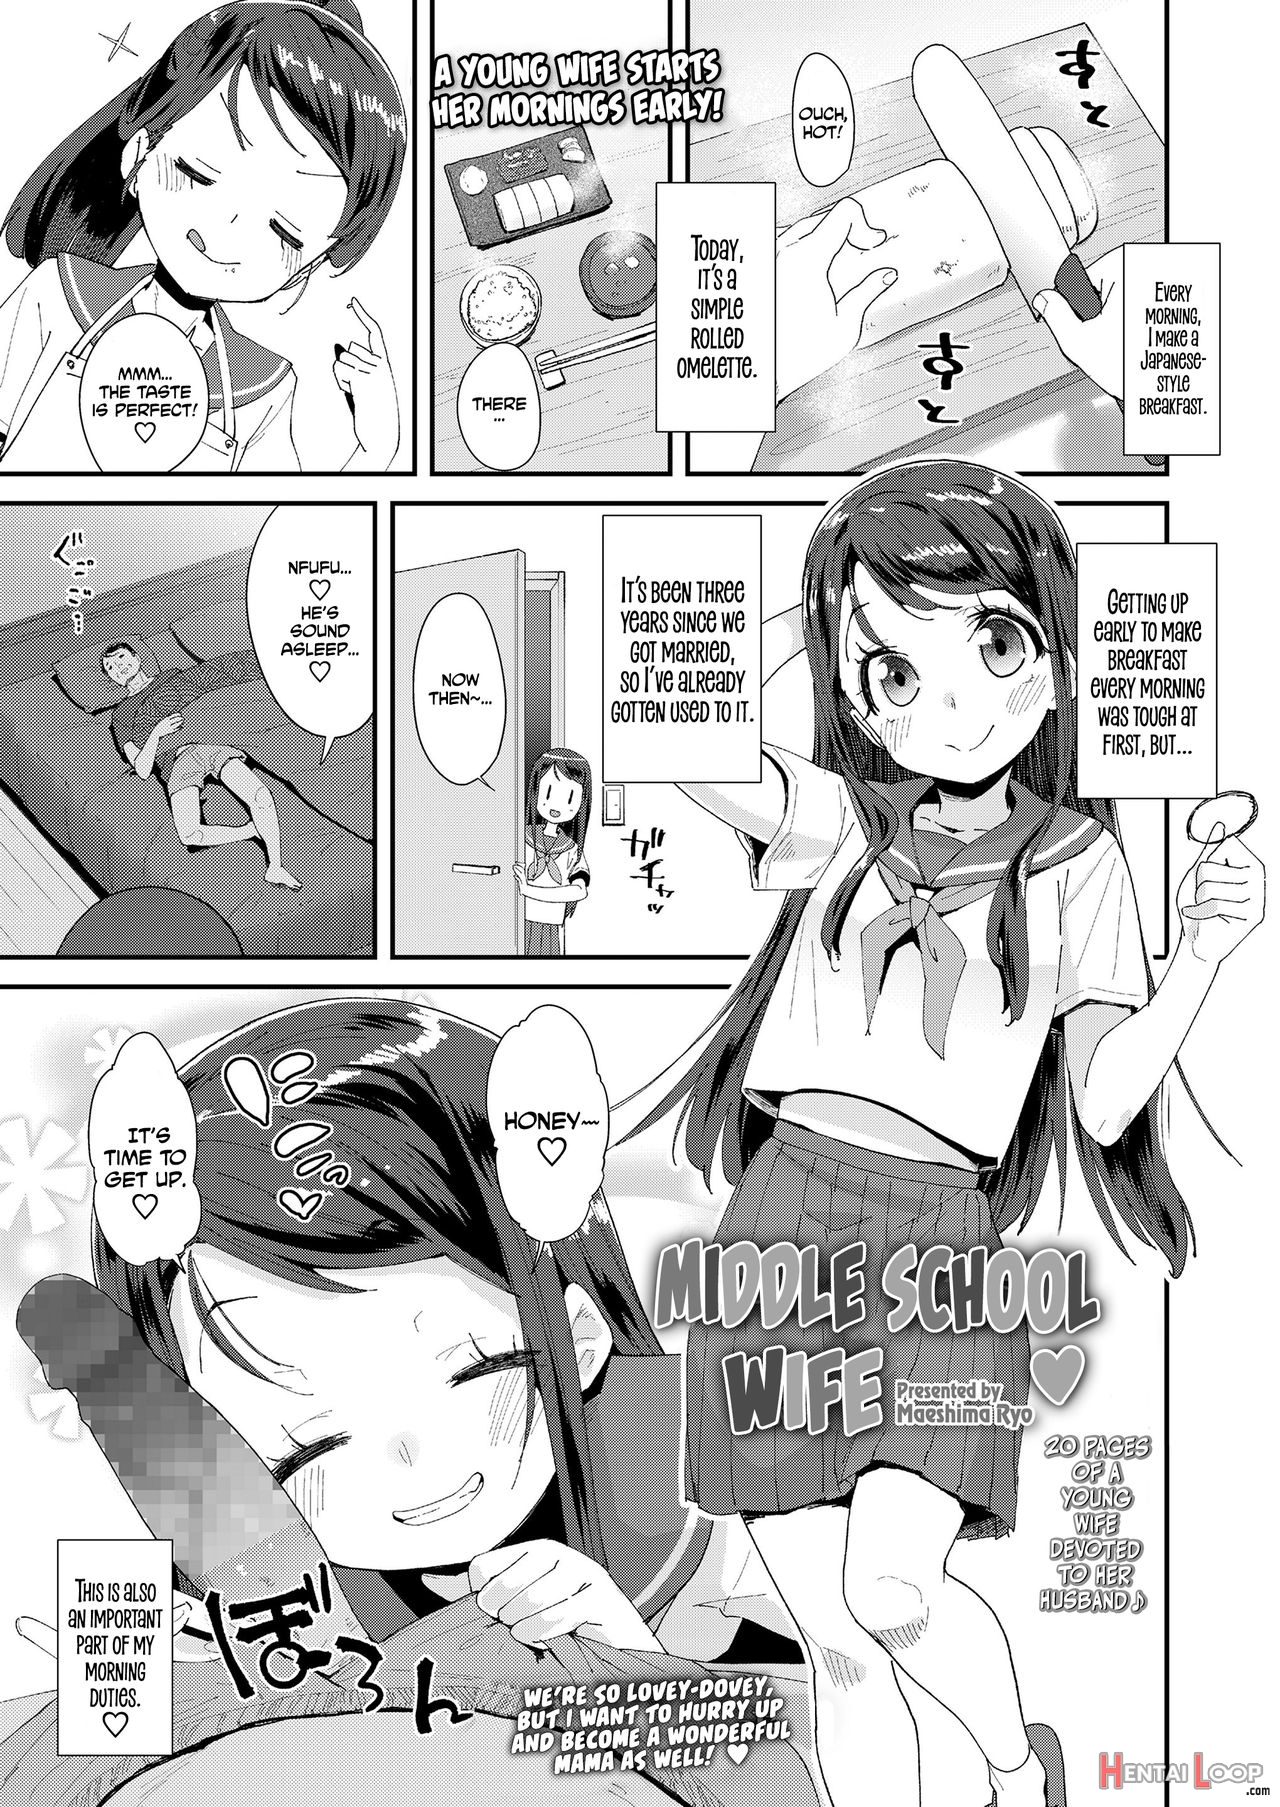 Middle School Wife ♥ page 1